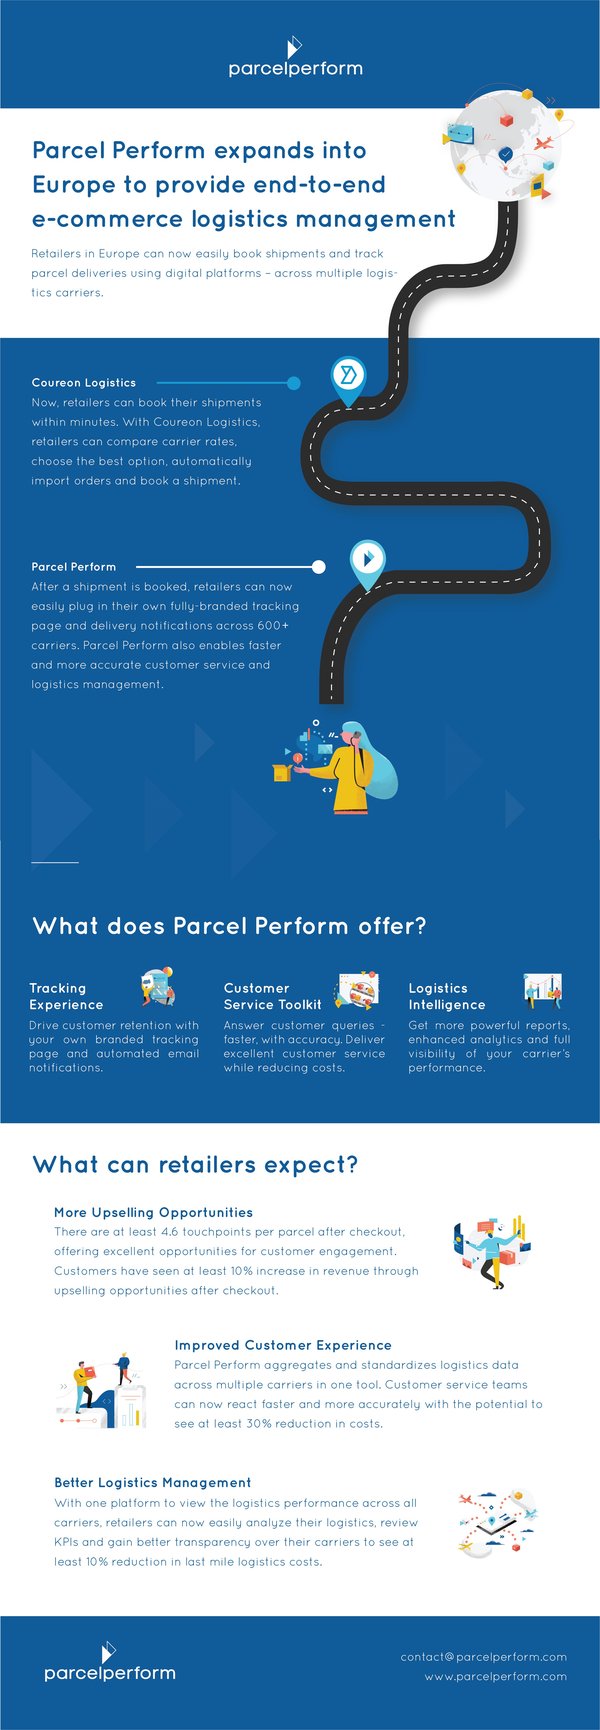 Parcel Perform expands into Europe and partners Coureon Logistics